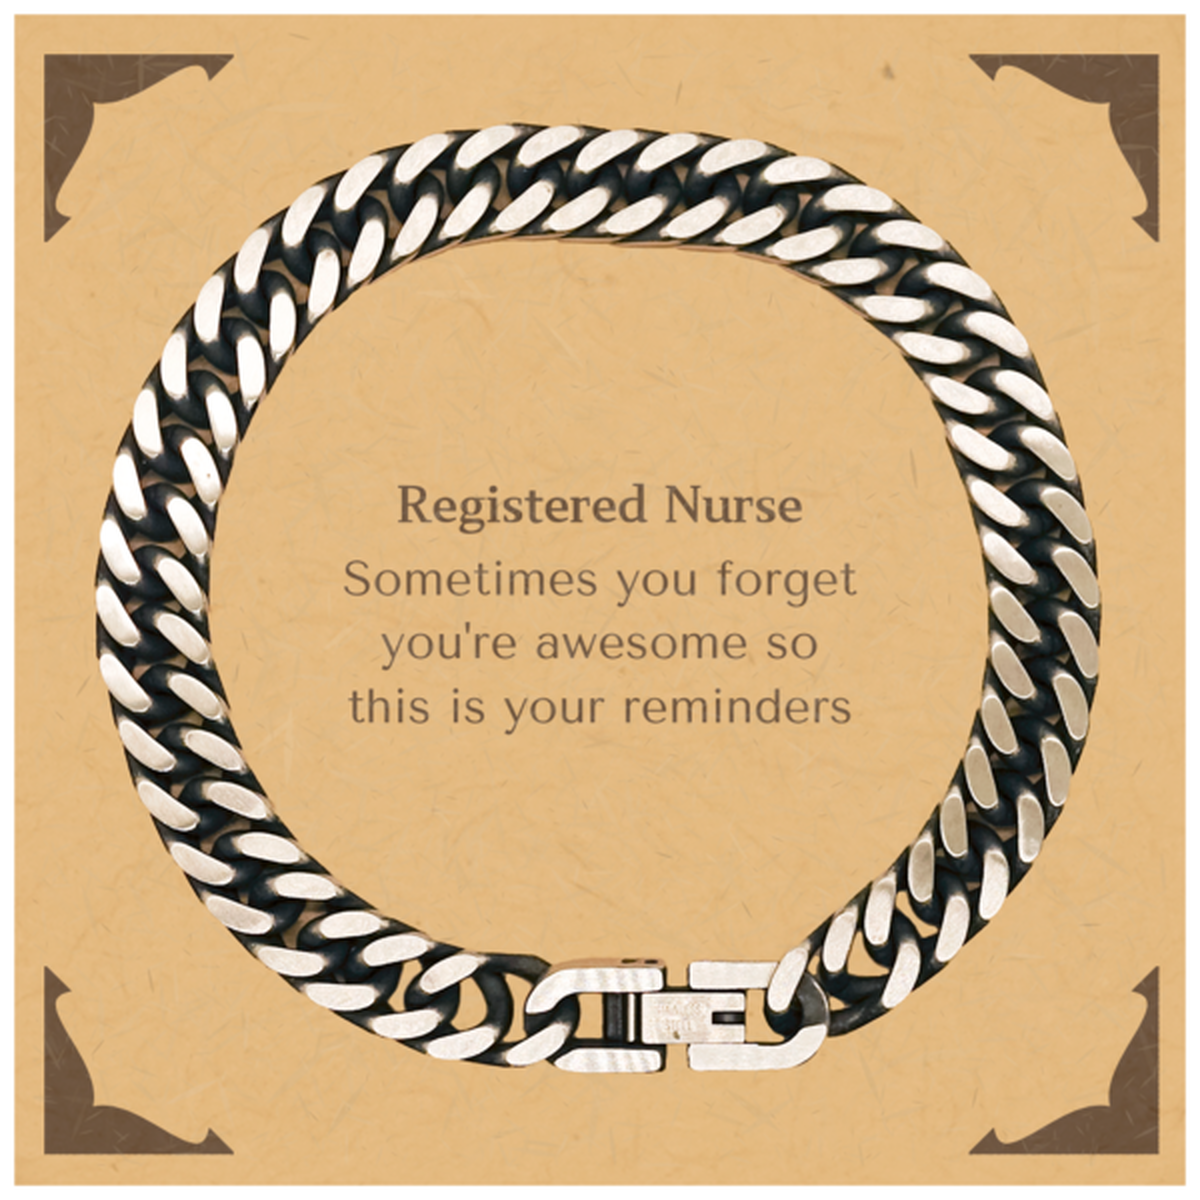 Sentimental Registered Nurse Cuban Link Chain Bracelet, Registered Nurse Sometimes you forget you're awesome so this is your reminders, Graduation Christmas Birthday Gifts for Registered Nurse, Men, Women, Coworkers